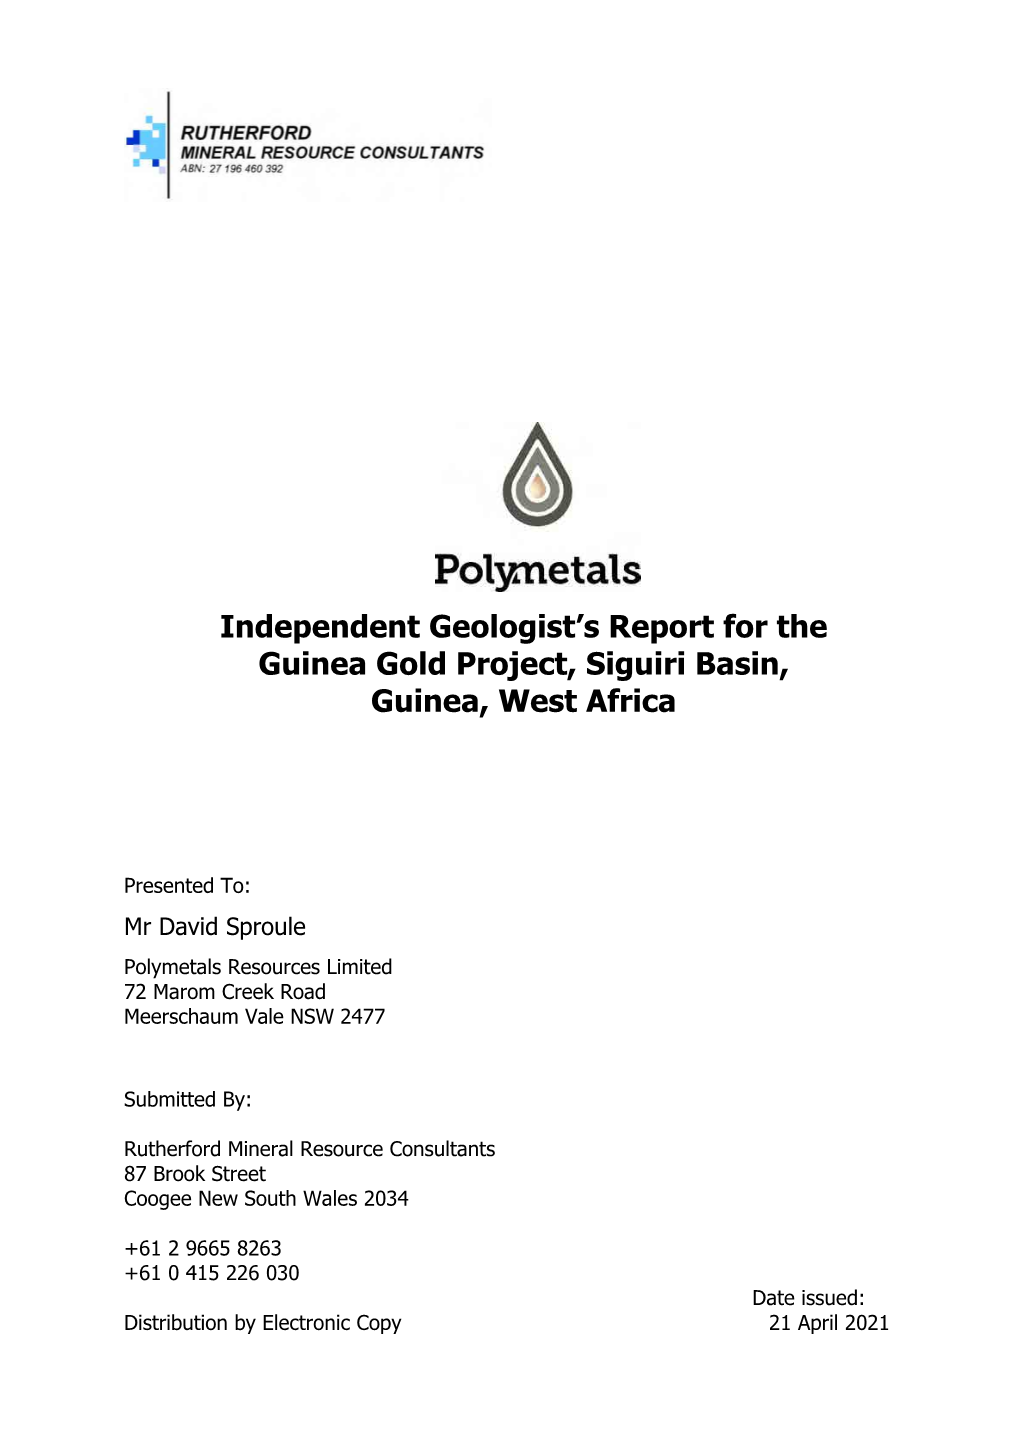 Independent Geologist's Report for the Guinea Gold Project, Siguiri Basin